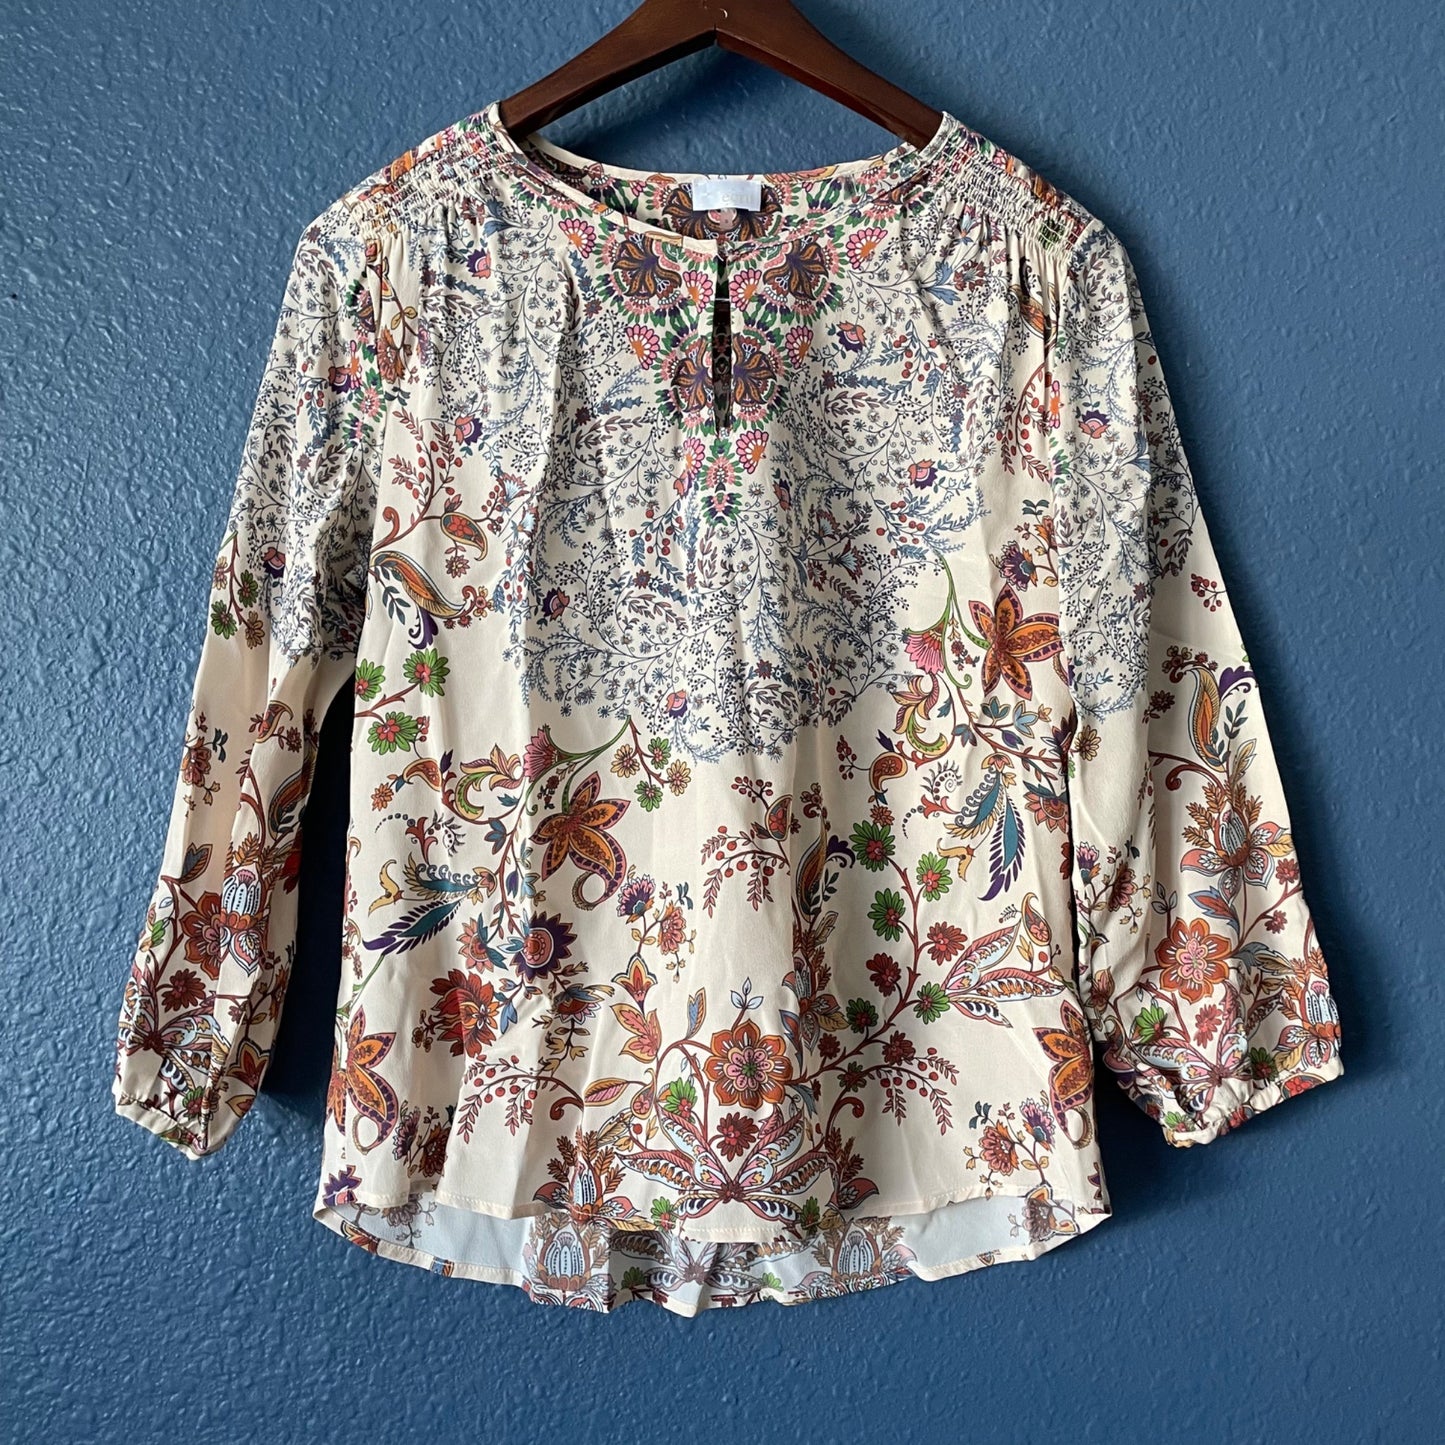 ecru The Squire Top 100% Silk Floral Paisley Keyhole Blouse Women's Size Small